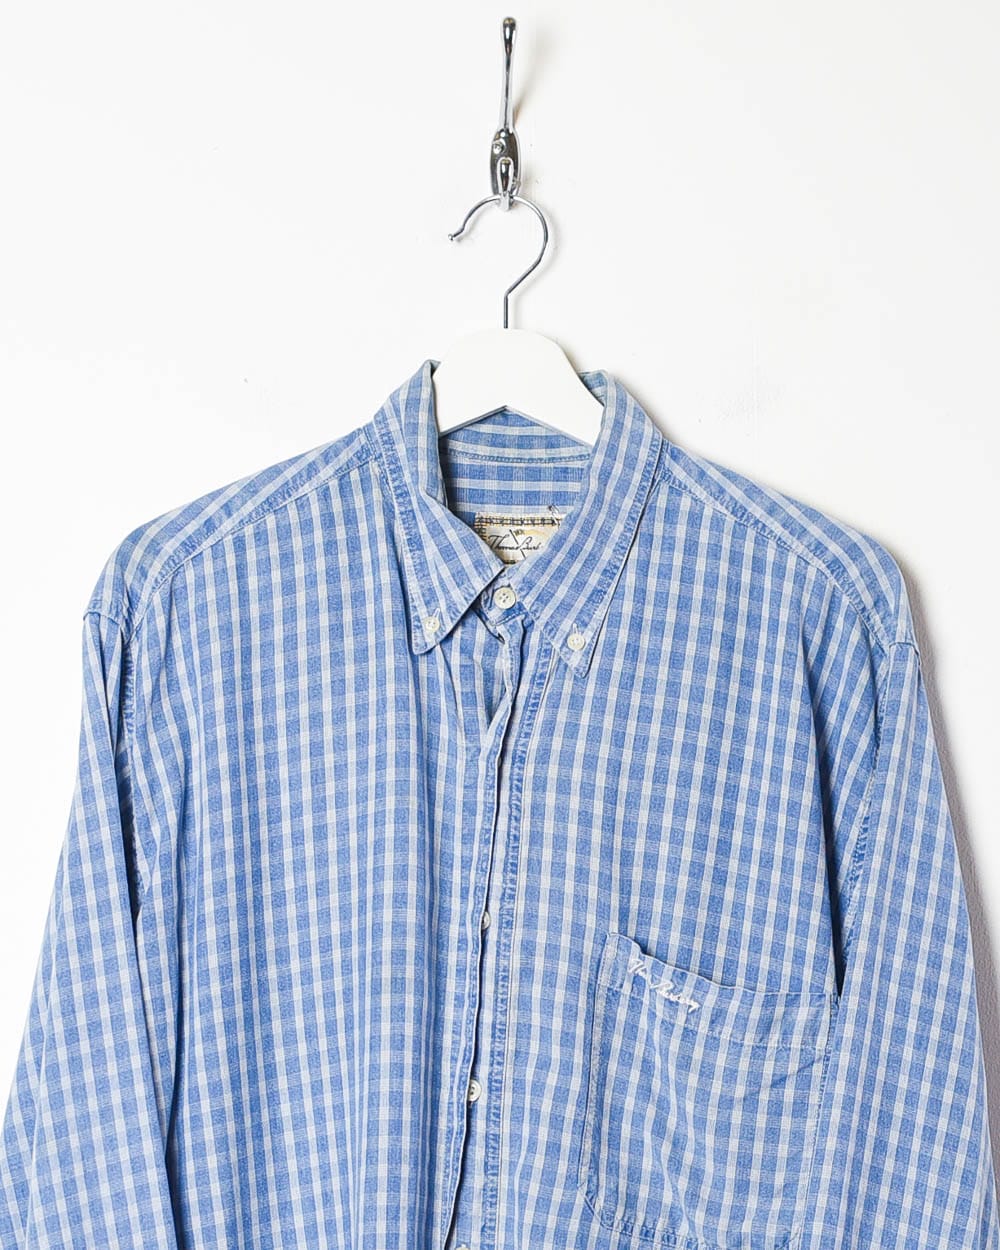 Baby Thomas Burberry Checked Shirt - Large